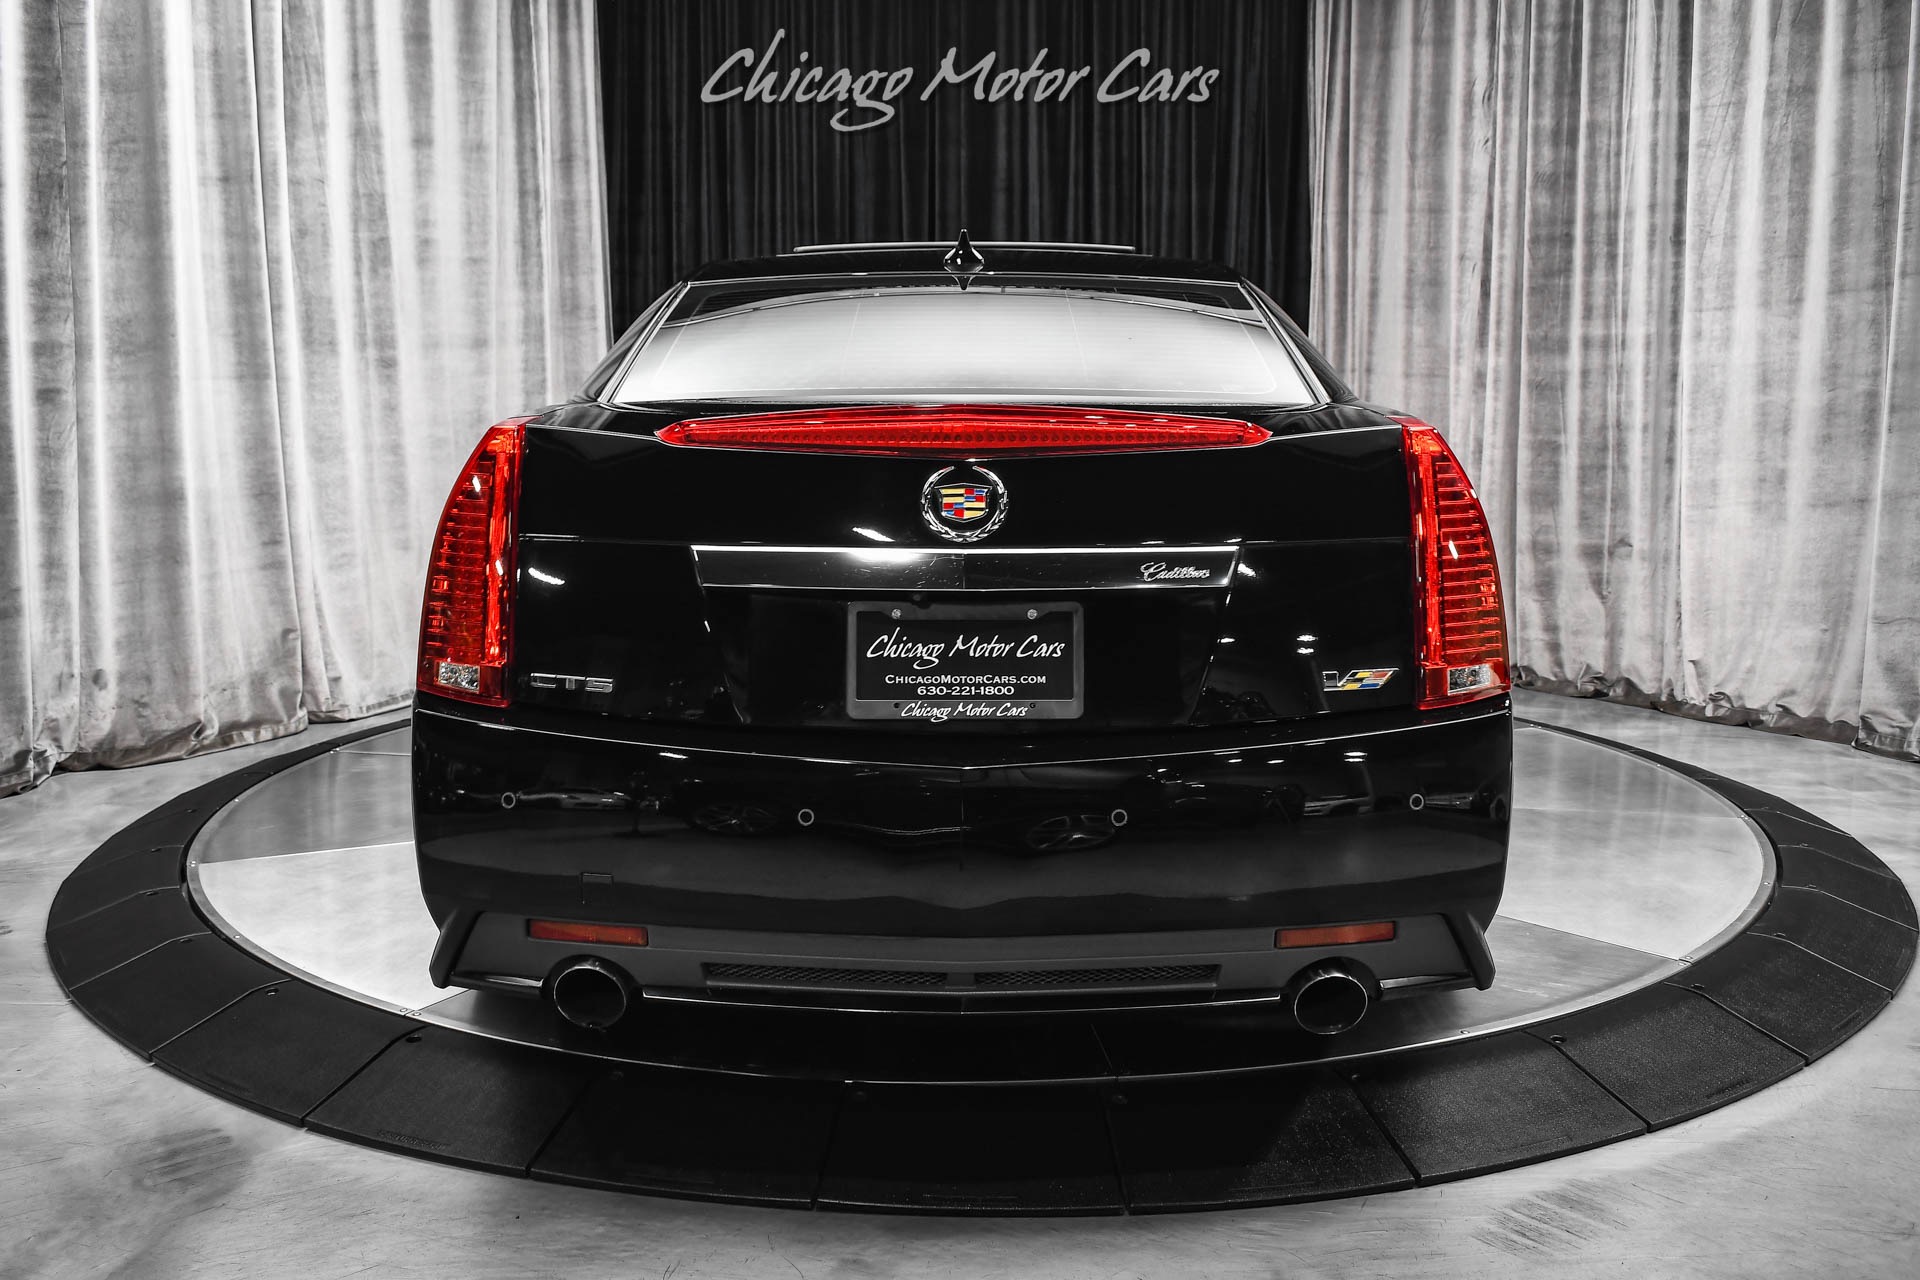 Used-2012-Cadillac-CTS-V-RECARO-SEATS-OVER-15K-EXTRAS-KW-COILOVERS-KOOKS-ZL1-LID